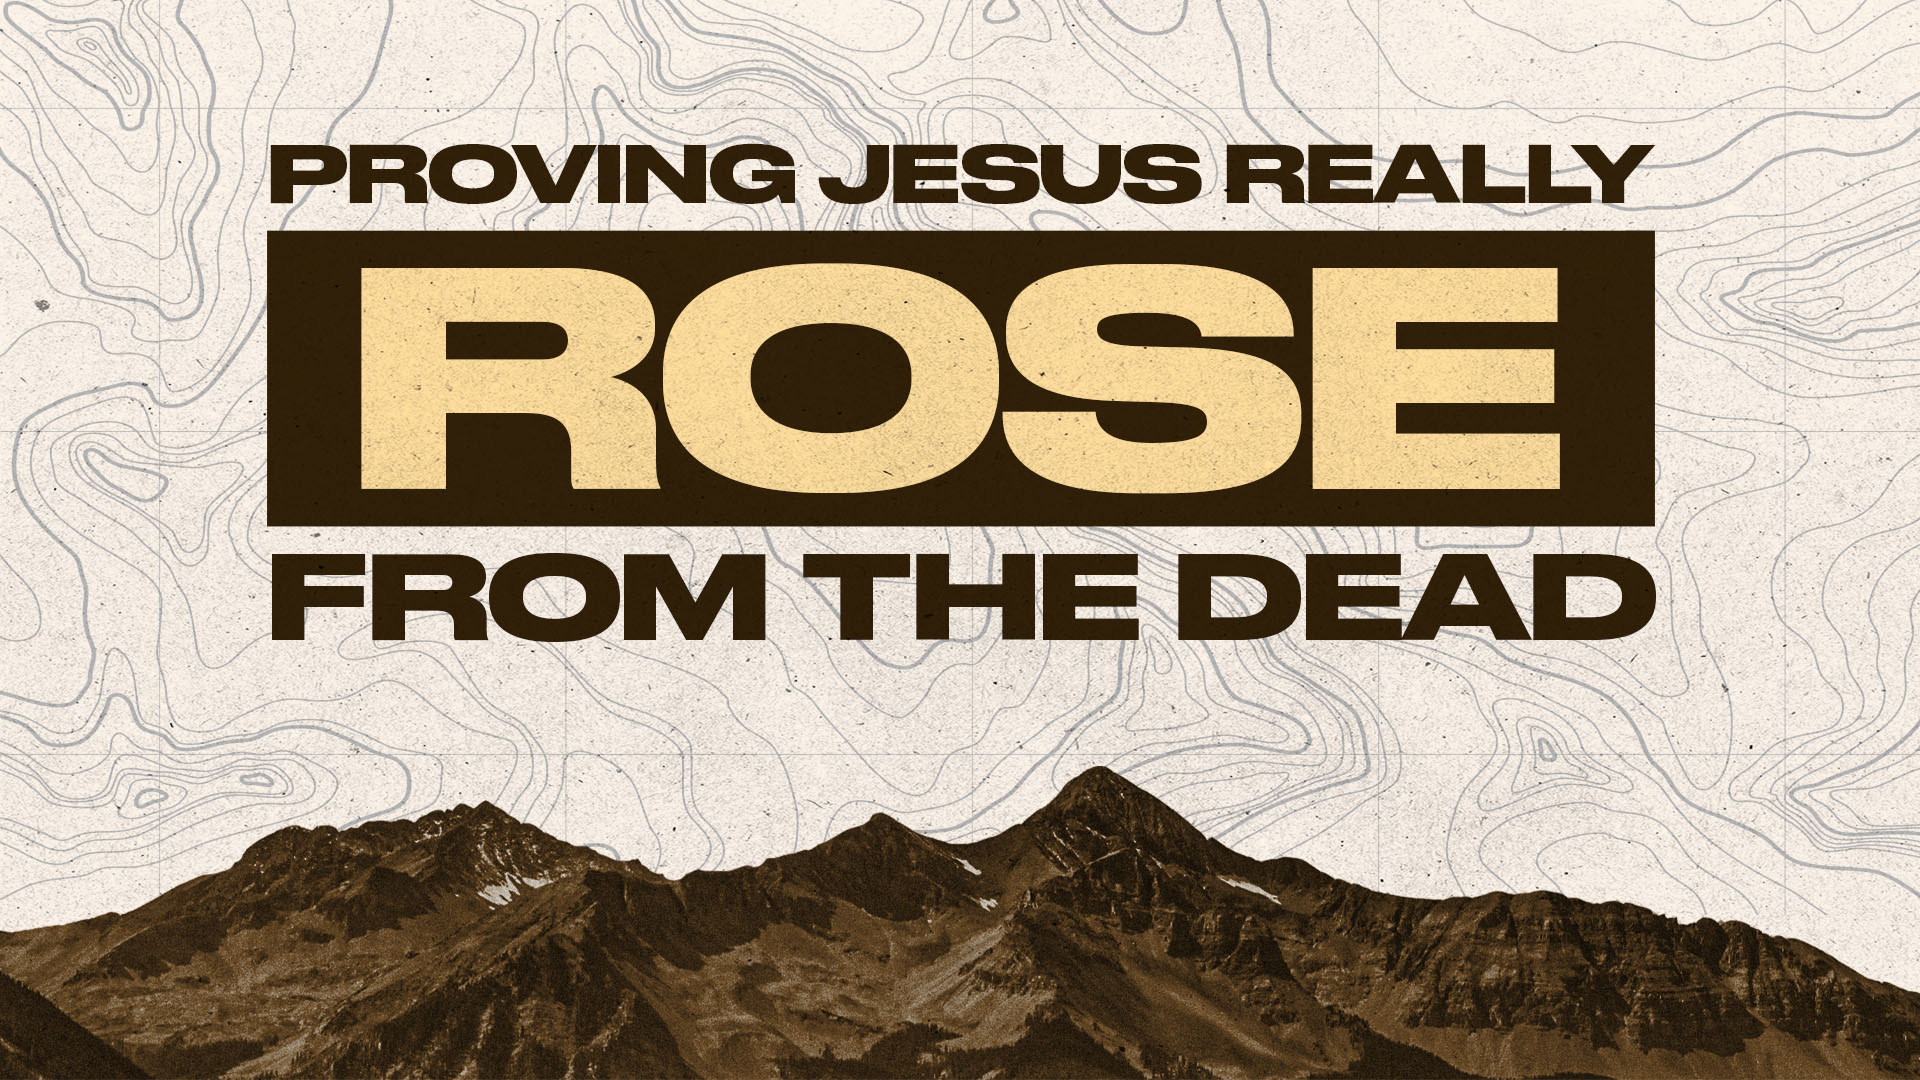 PROVING JESUS REALLY ROSE FROM THE DEAD